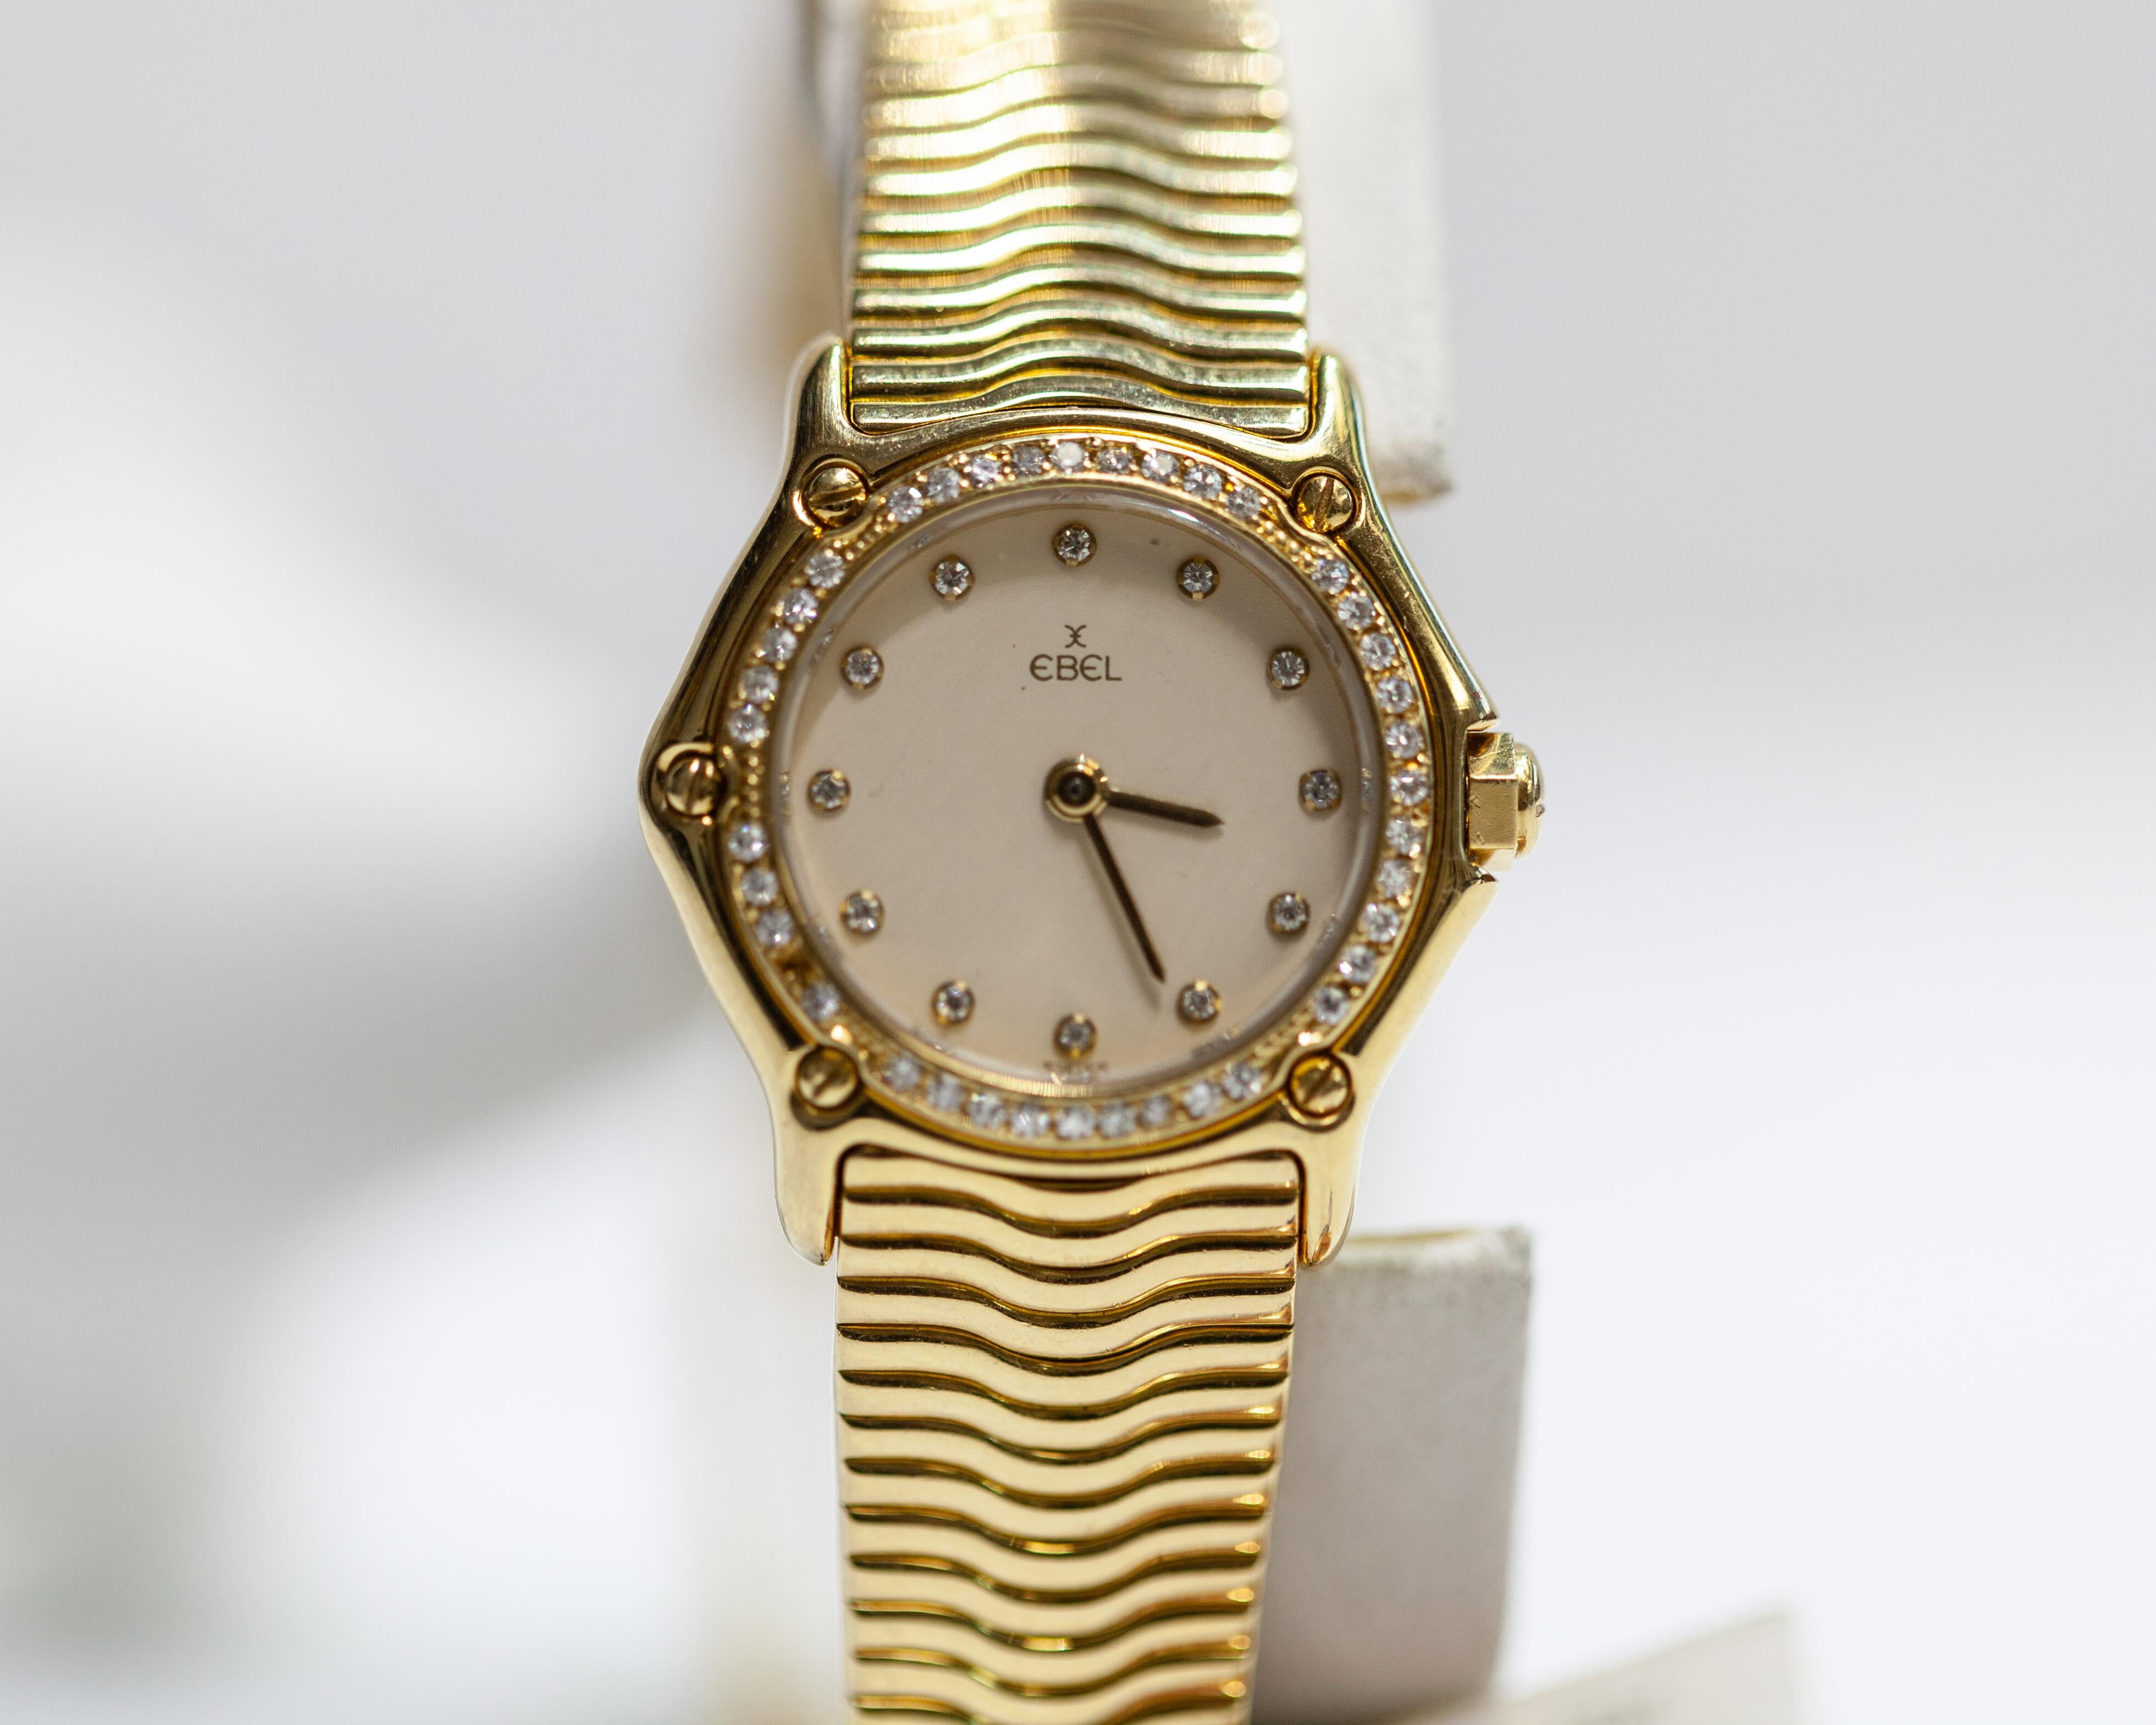 Basic Info
Listing number	NB00005
Brand	                EBEL
Movement	        Quartz
Case Material	        18k Yellow Gold
Bracelet material	18k Yellow Gold
Condition	        Good (Light signs of wear or scratches)

The scope of delivery	No original